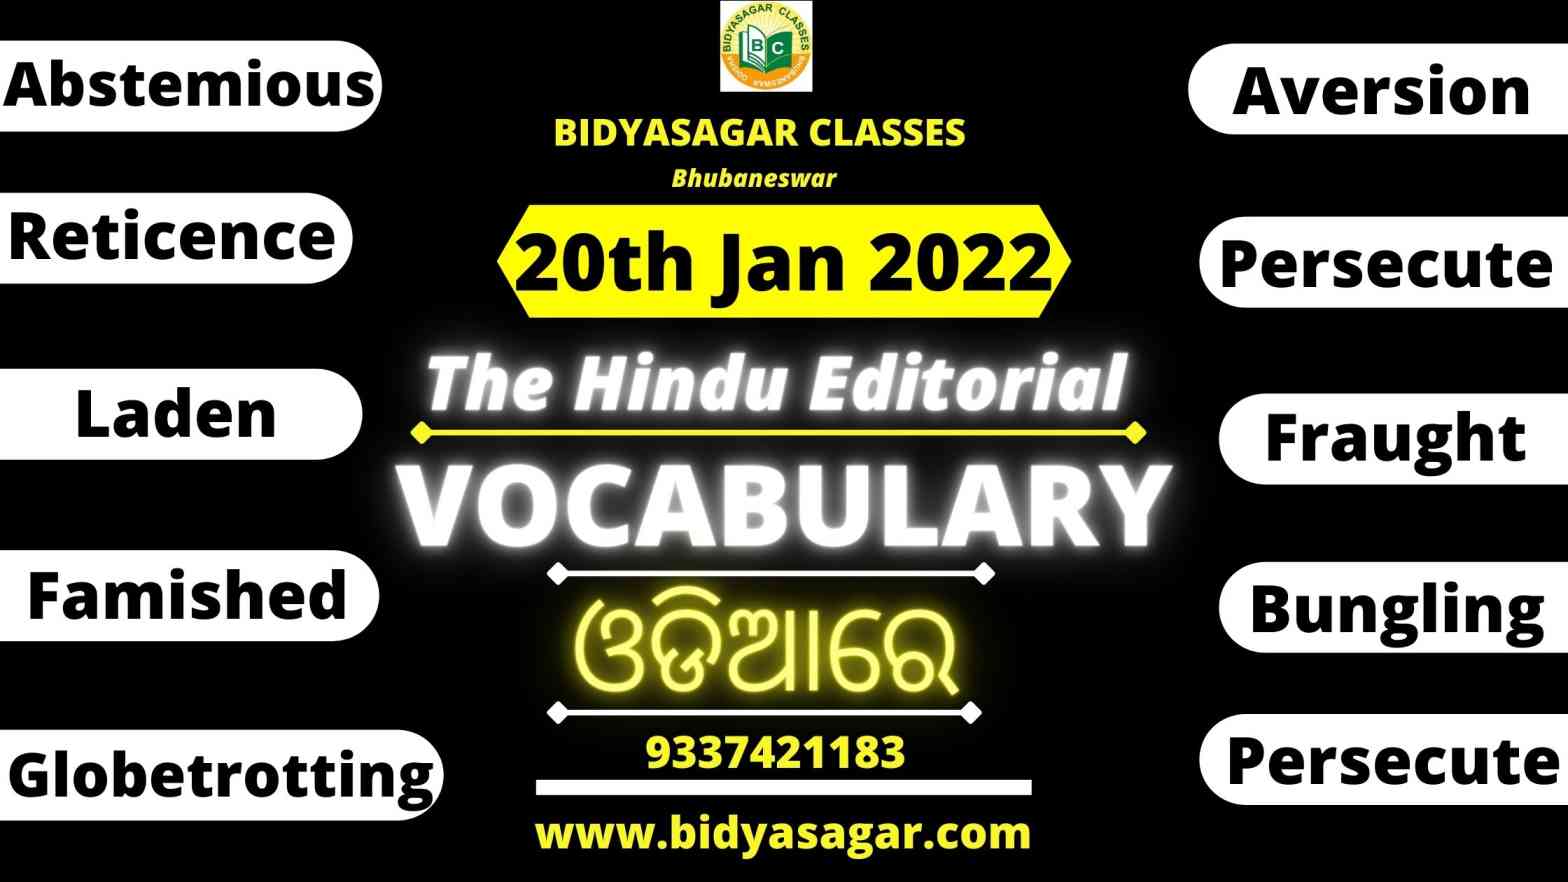 The Hindu Editorial Vocabulary of 20th January 2022